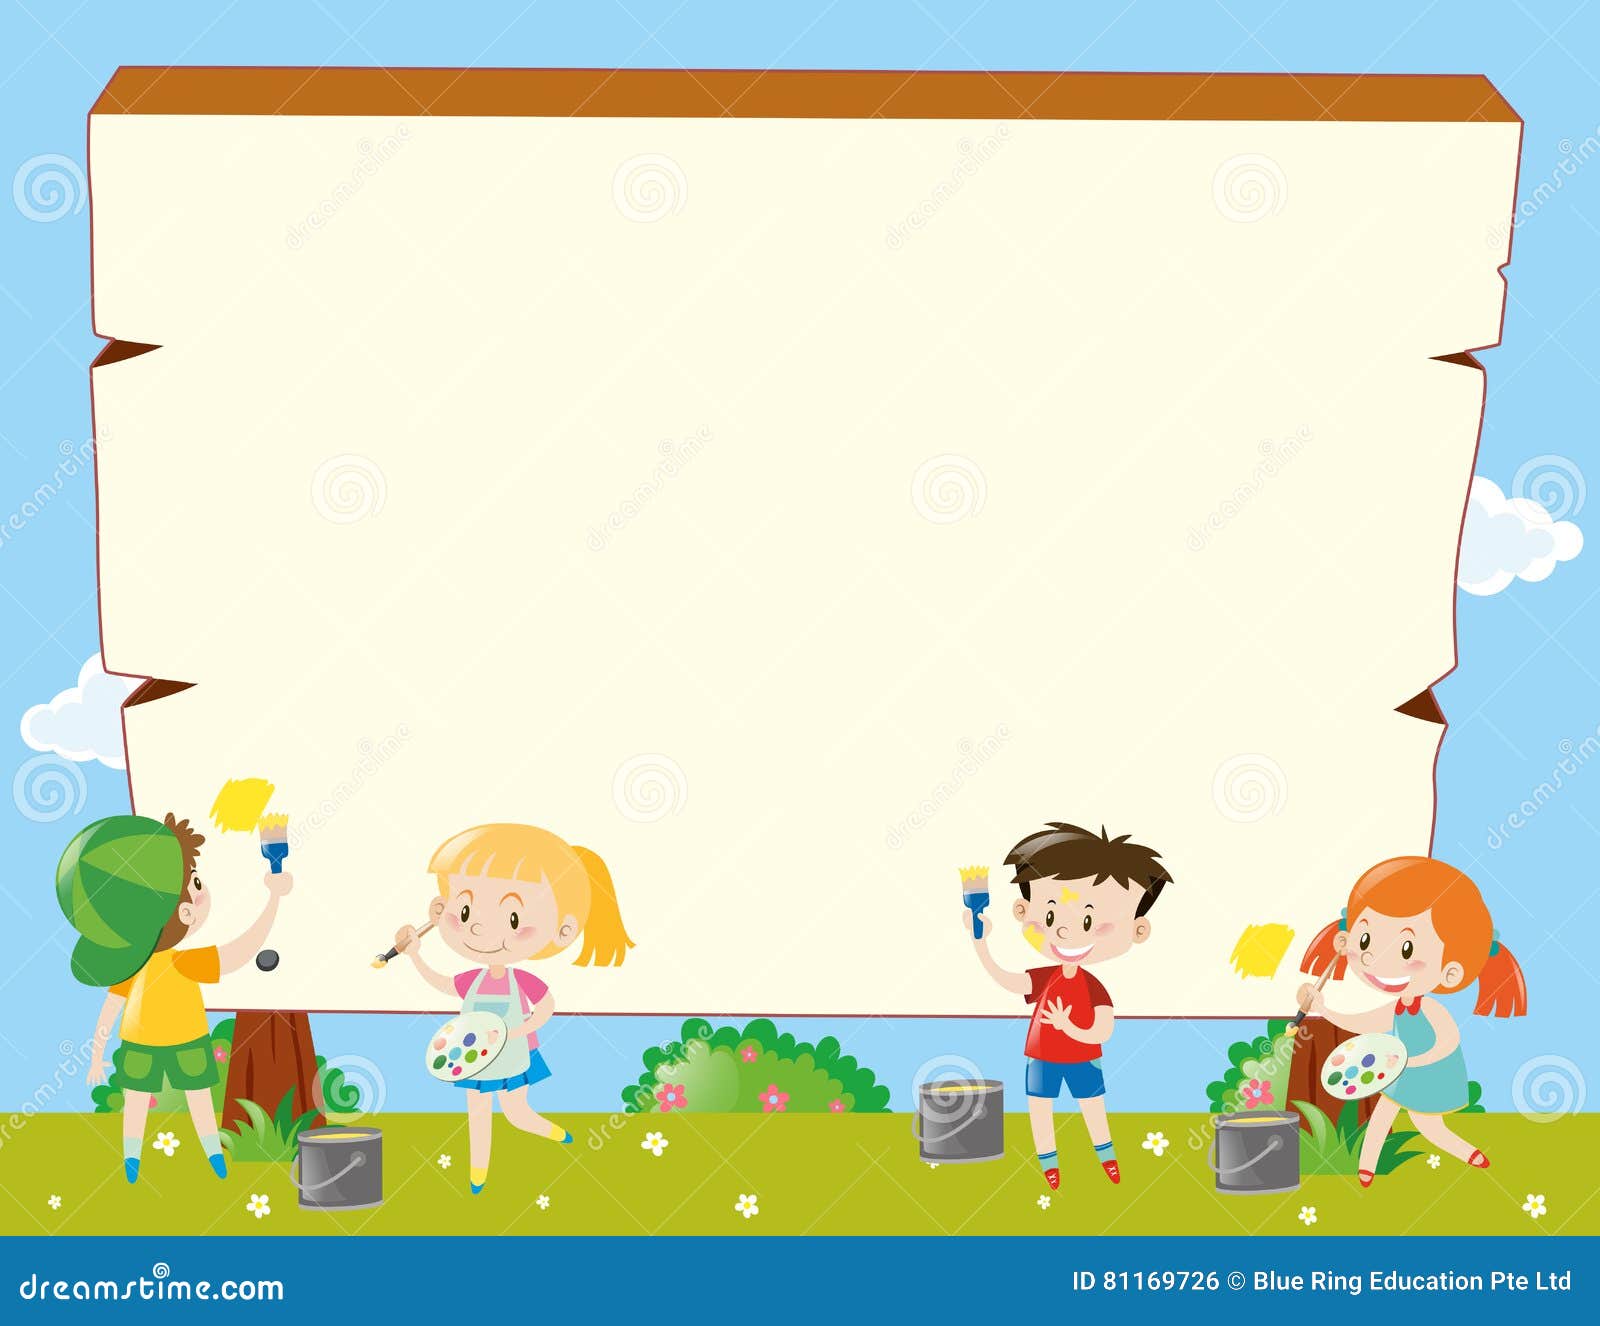 Border Template with Kids Painting Stock Vector - Illustration of paper,  youth: 81169726